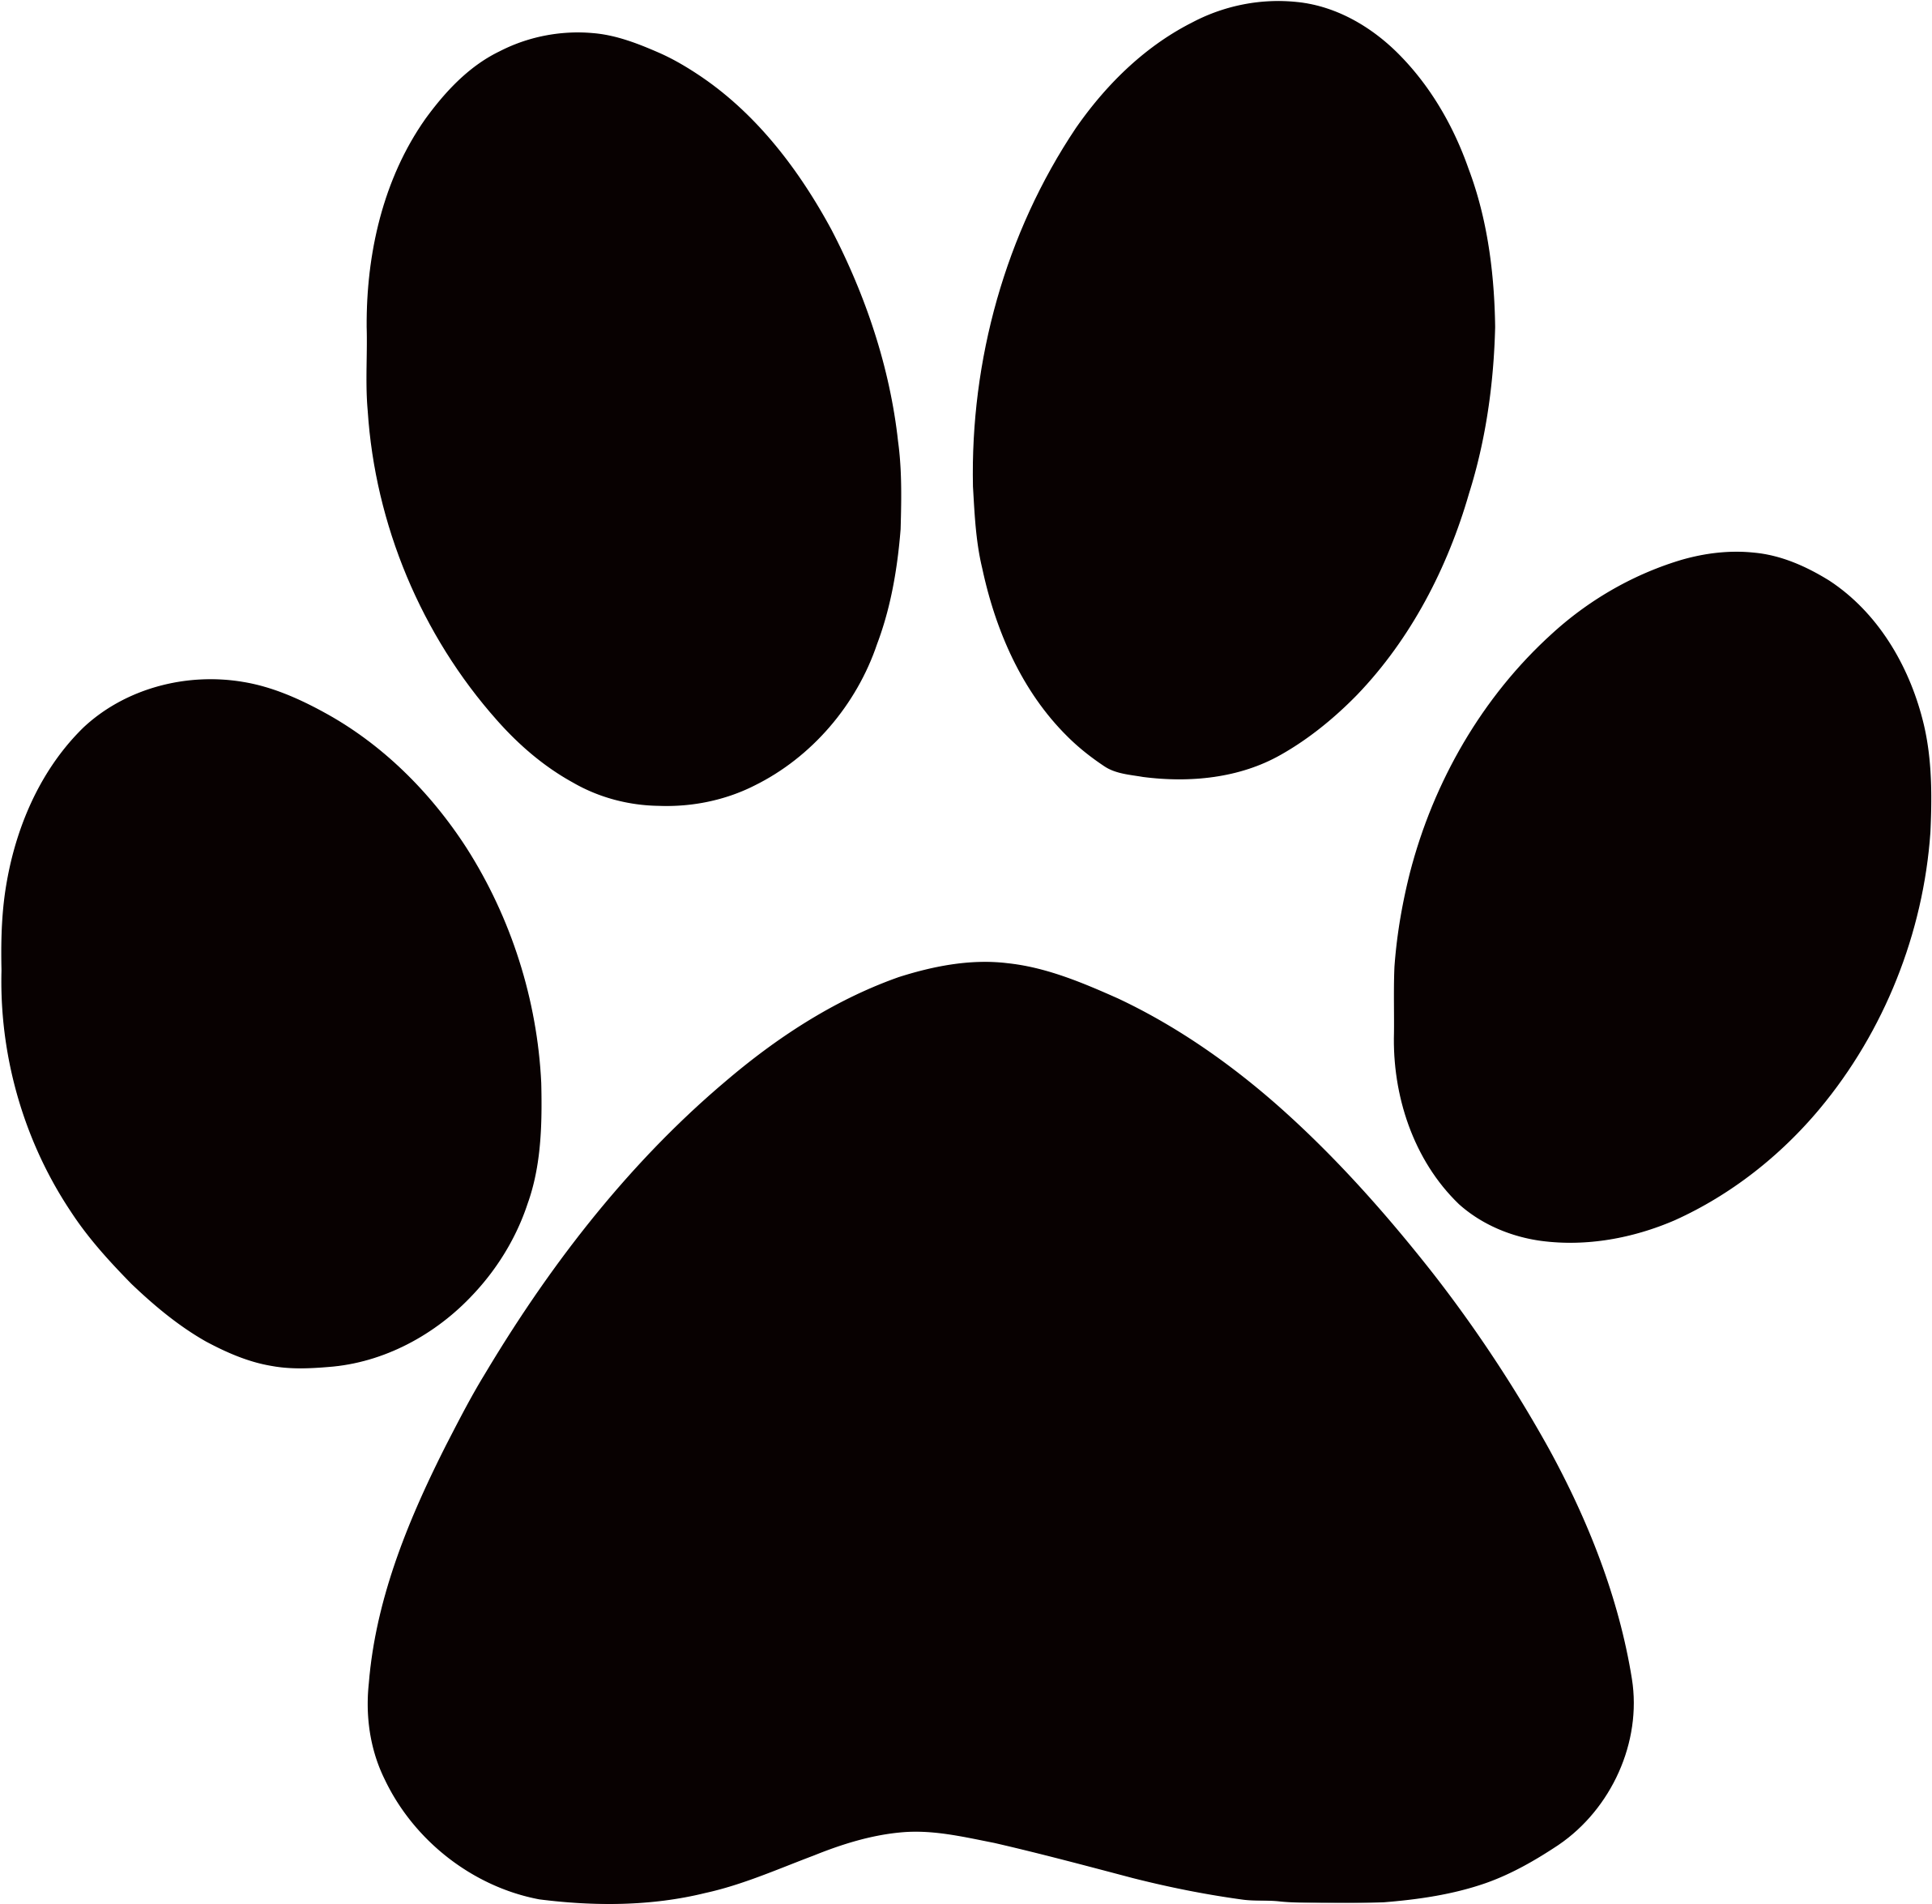 Cougar Paw Print Clip Art Clipart Best Dog Paw